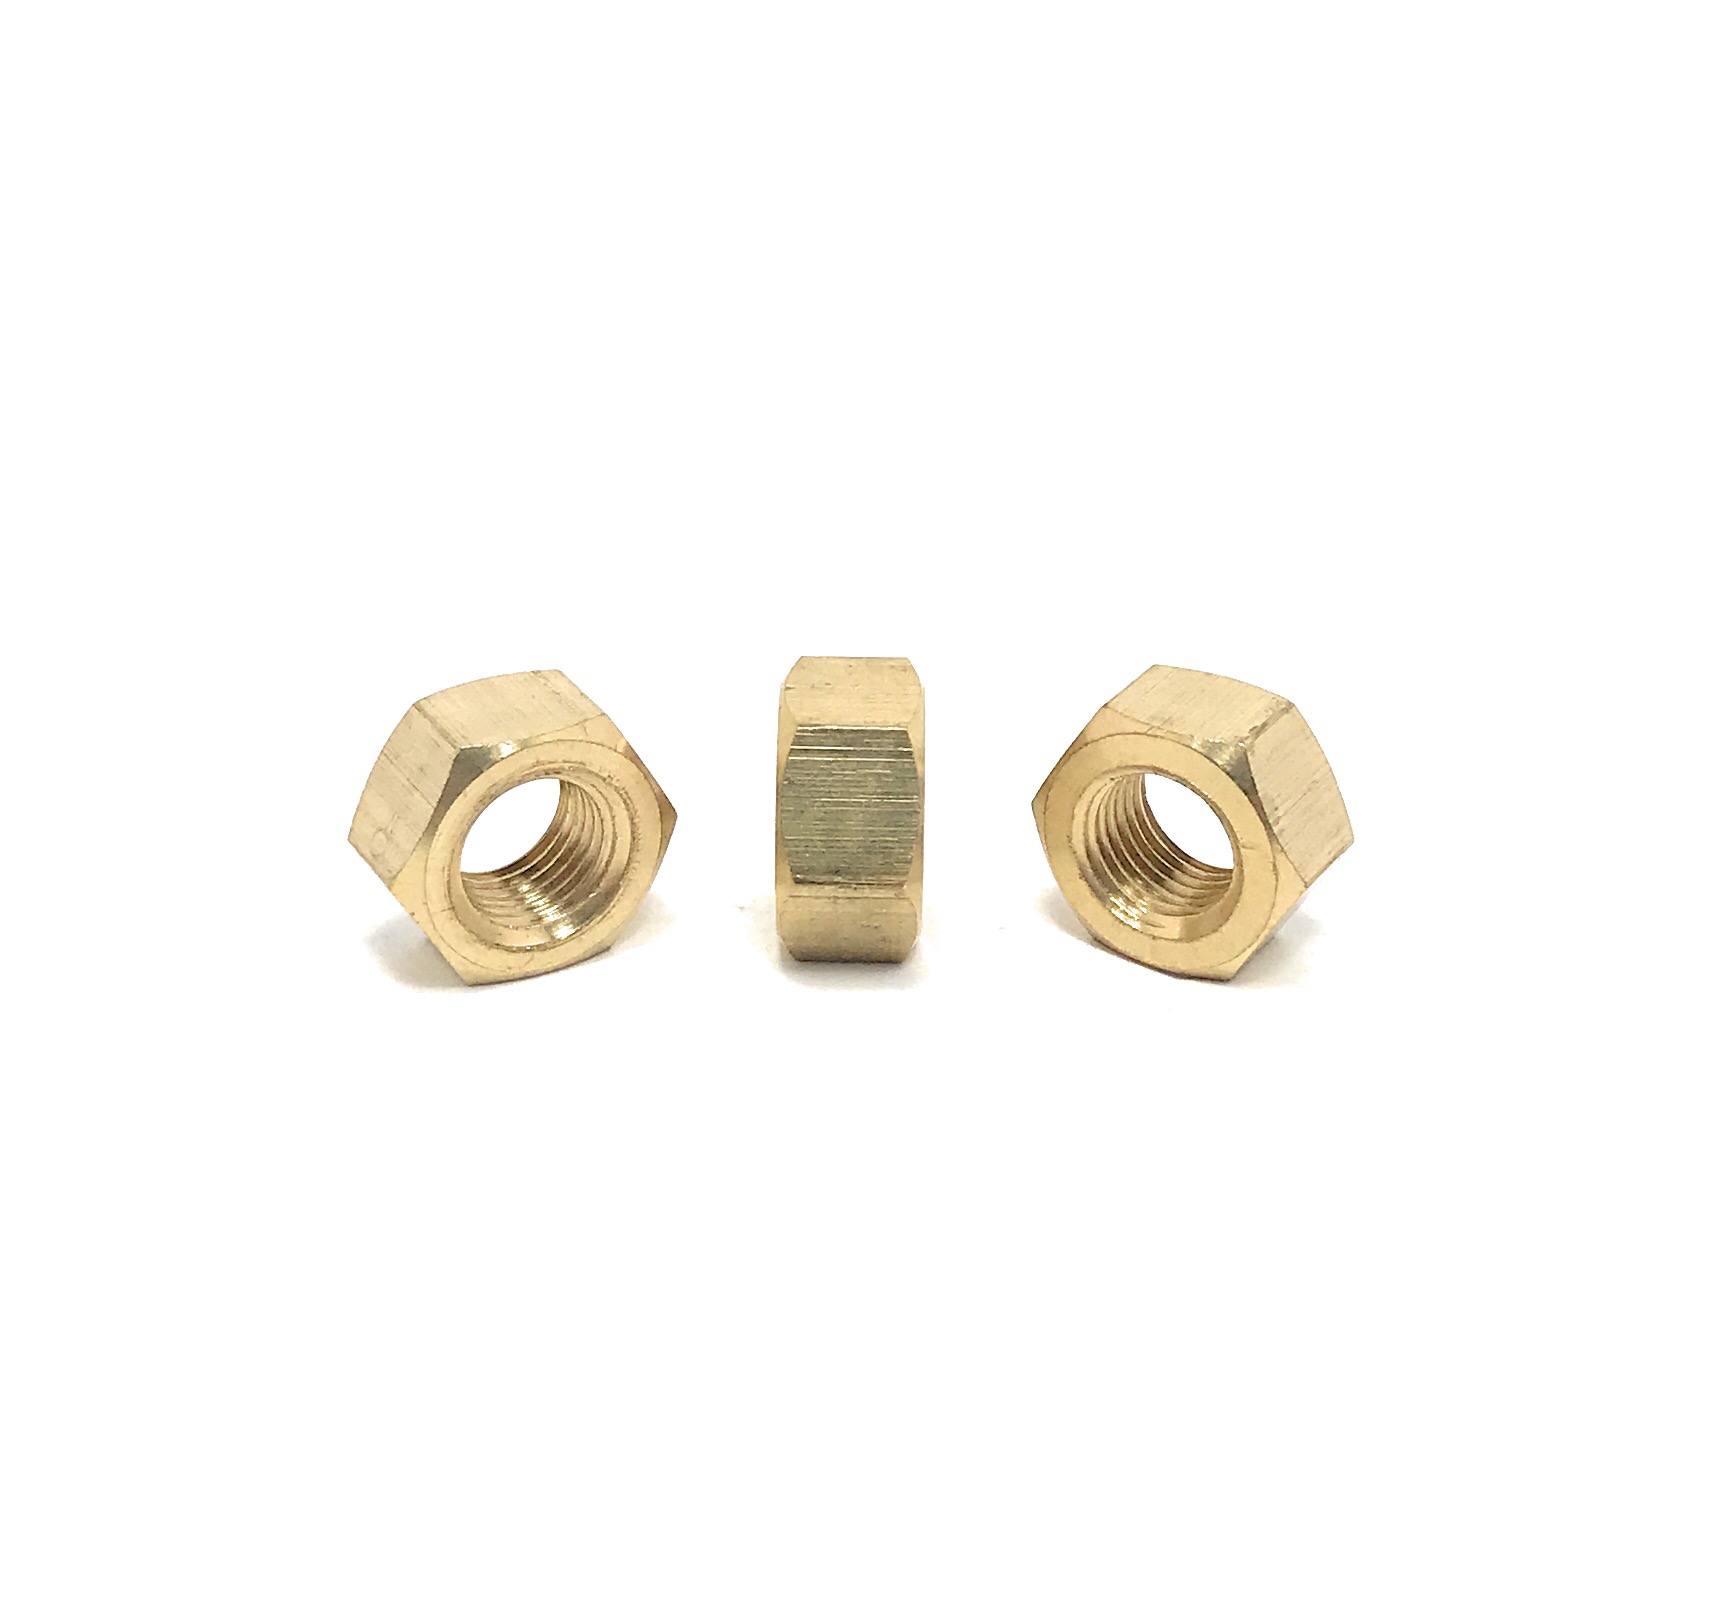 10 Pieces Solid Brass 10 7/16-14 Brass Finished Hex Nuts 